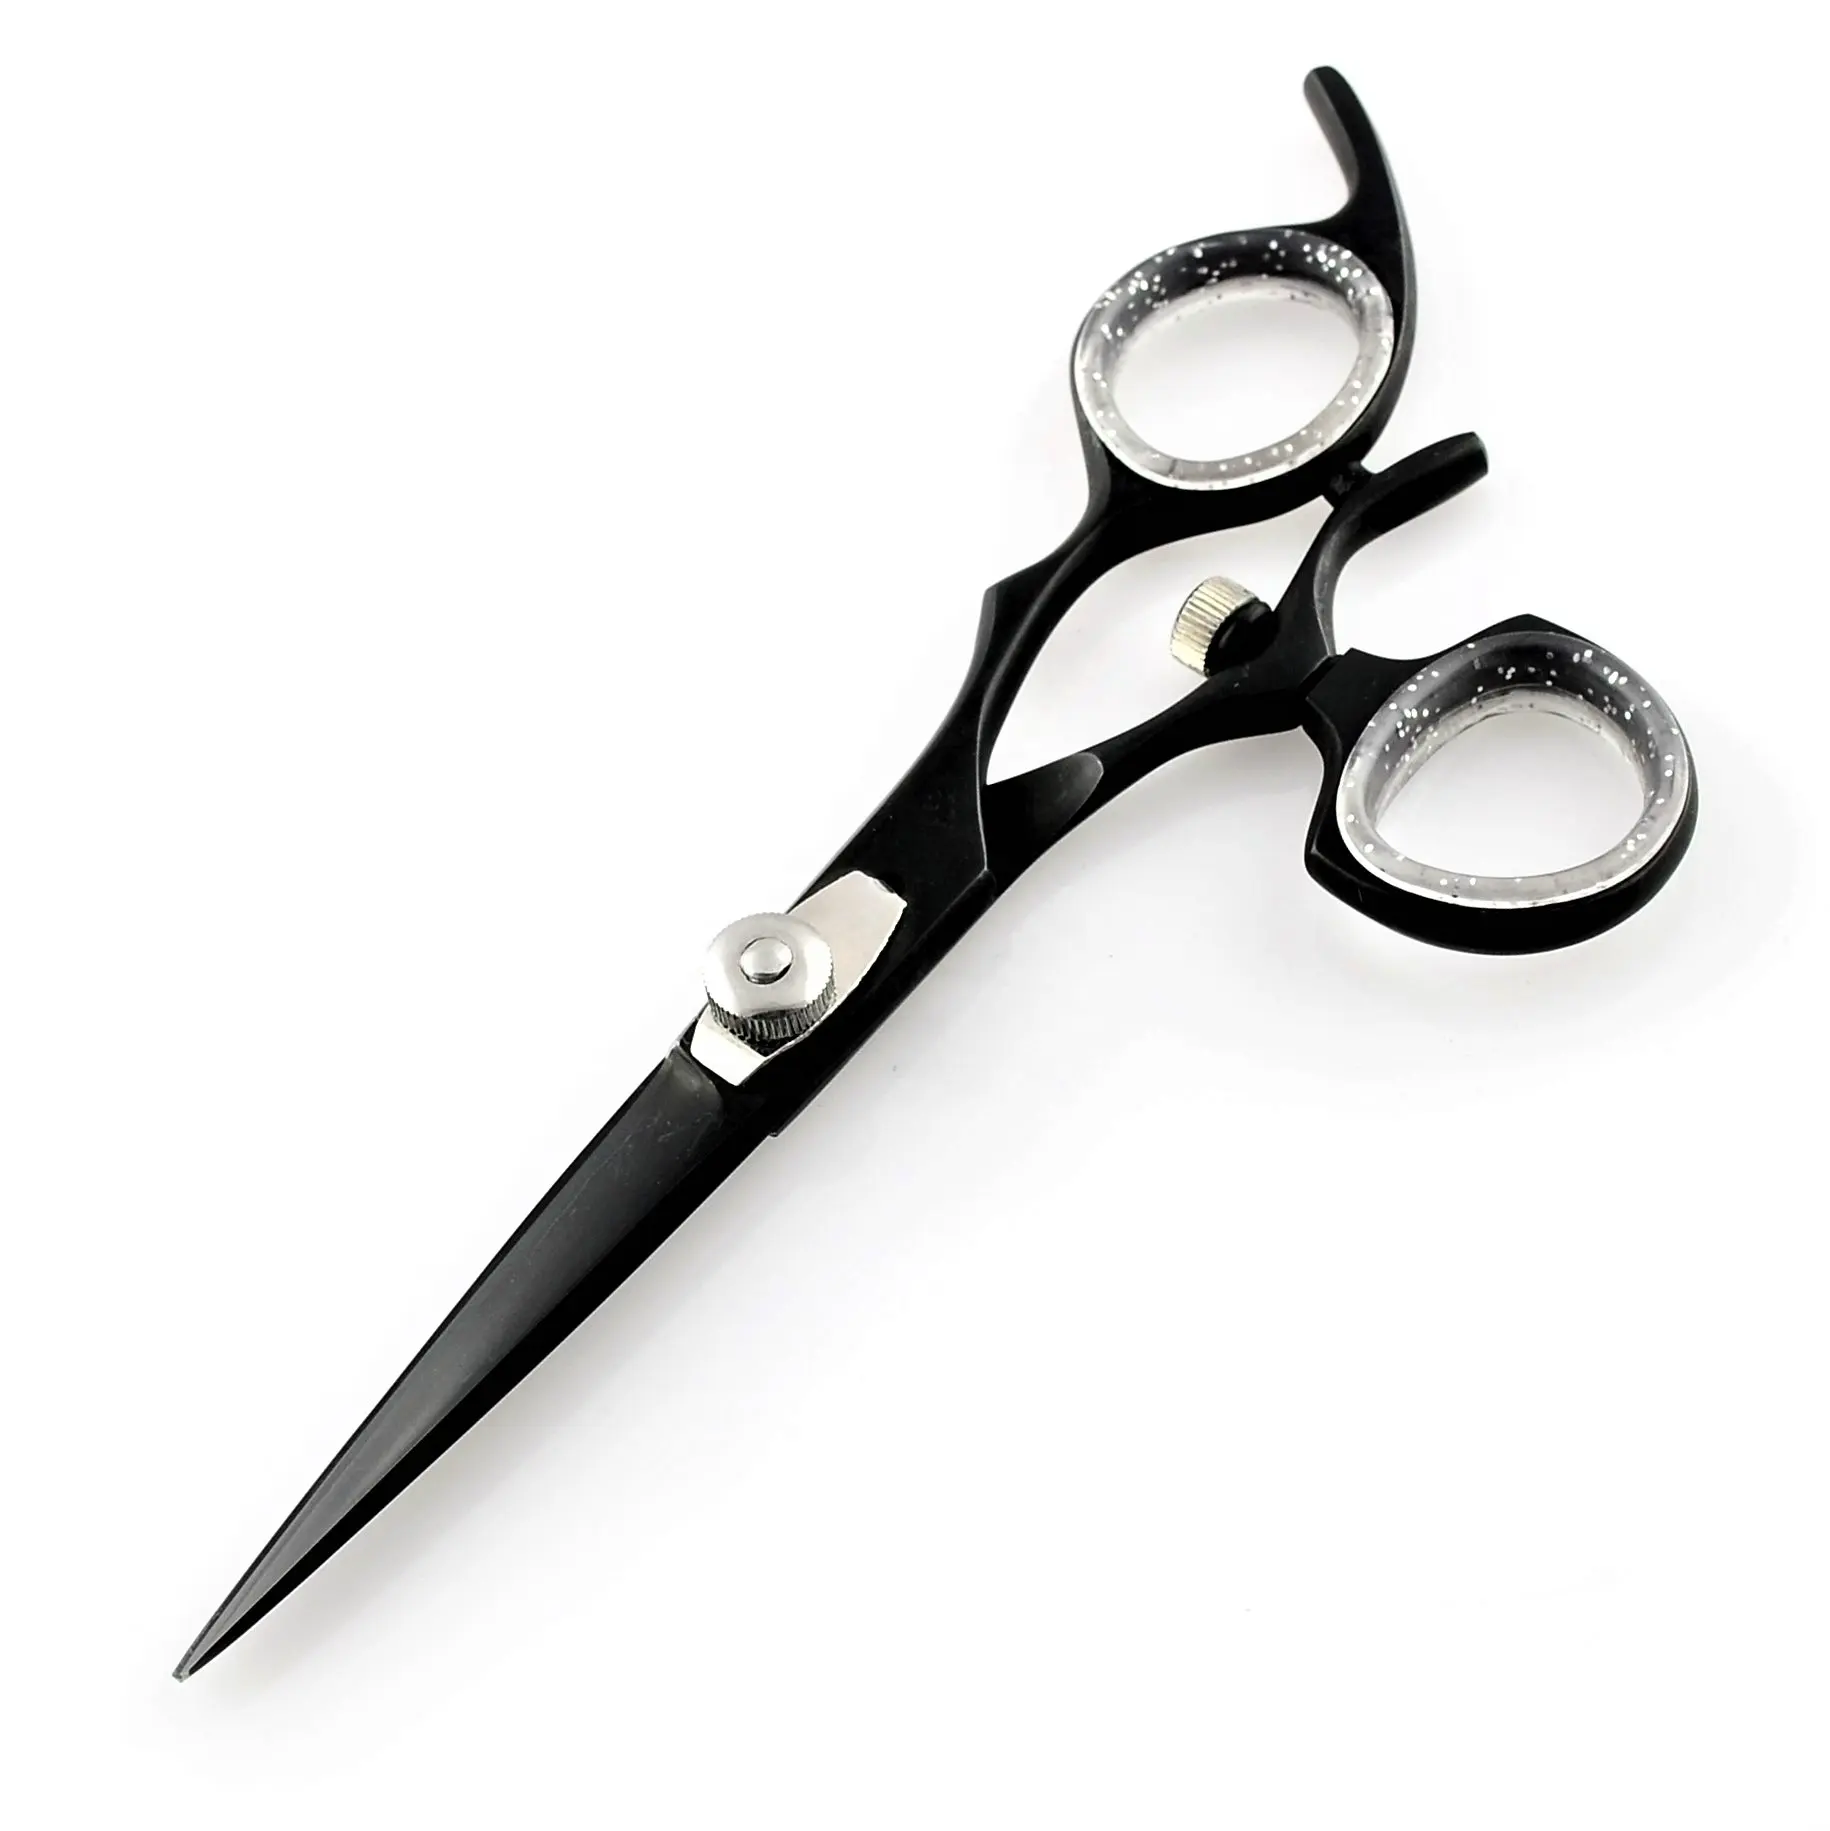 Handmade Professional Hair Cutting Barber Scissor Stainless Steel Razor Edge Hairdressing Shears Movable Ring Black Color Coated